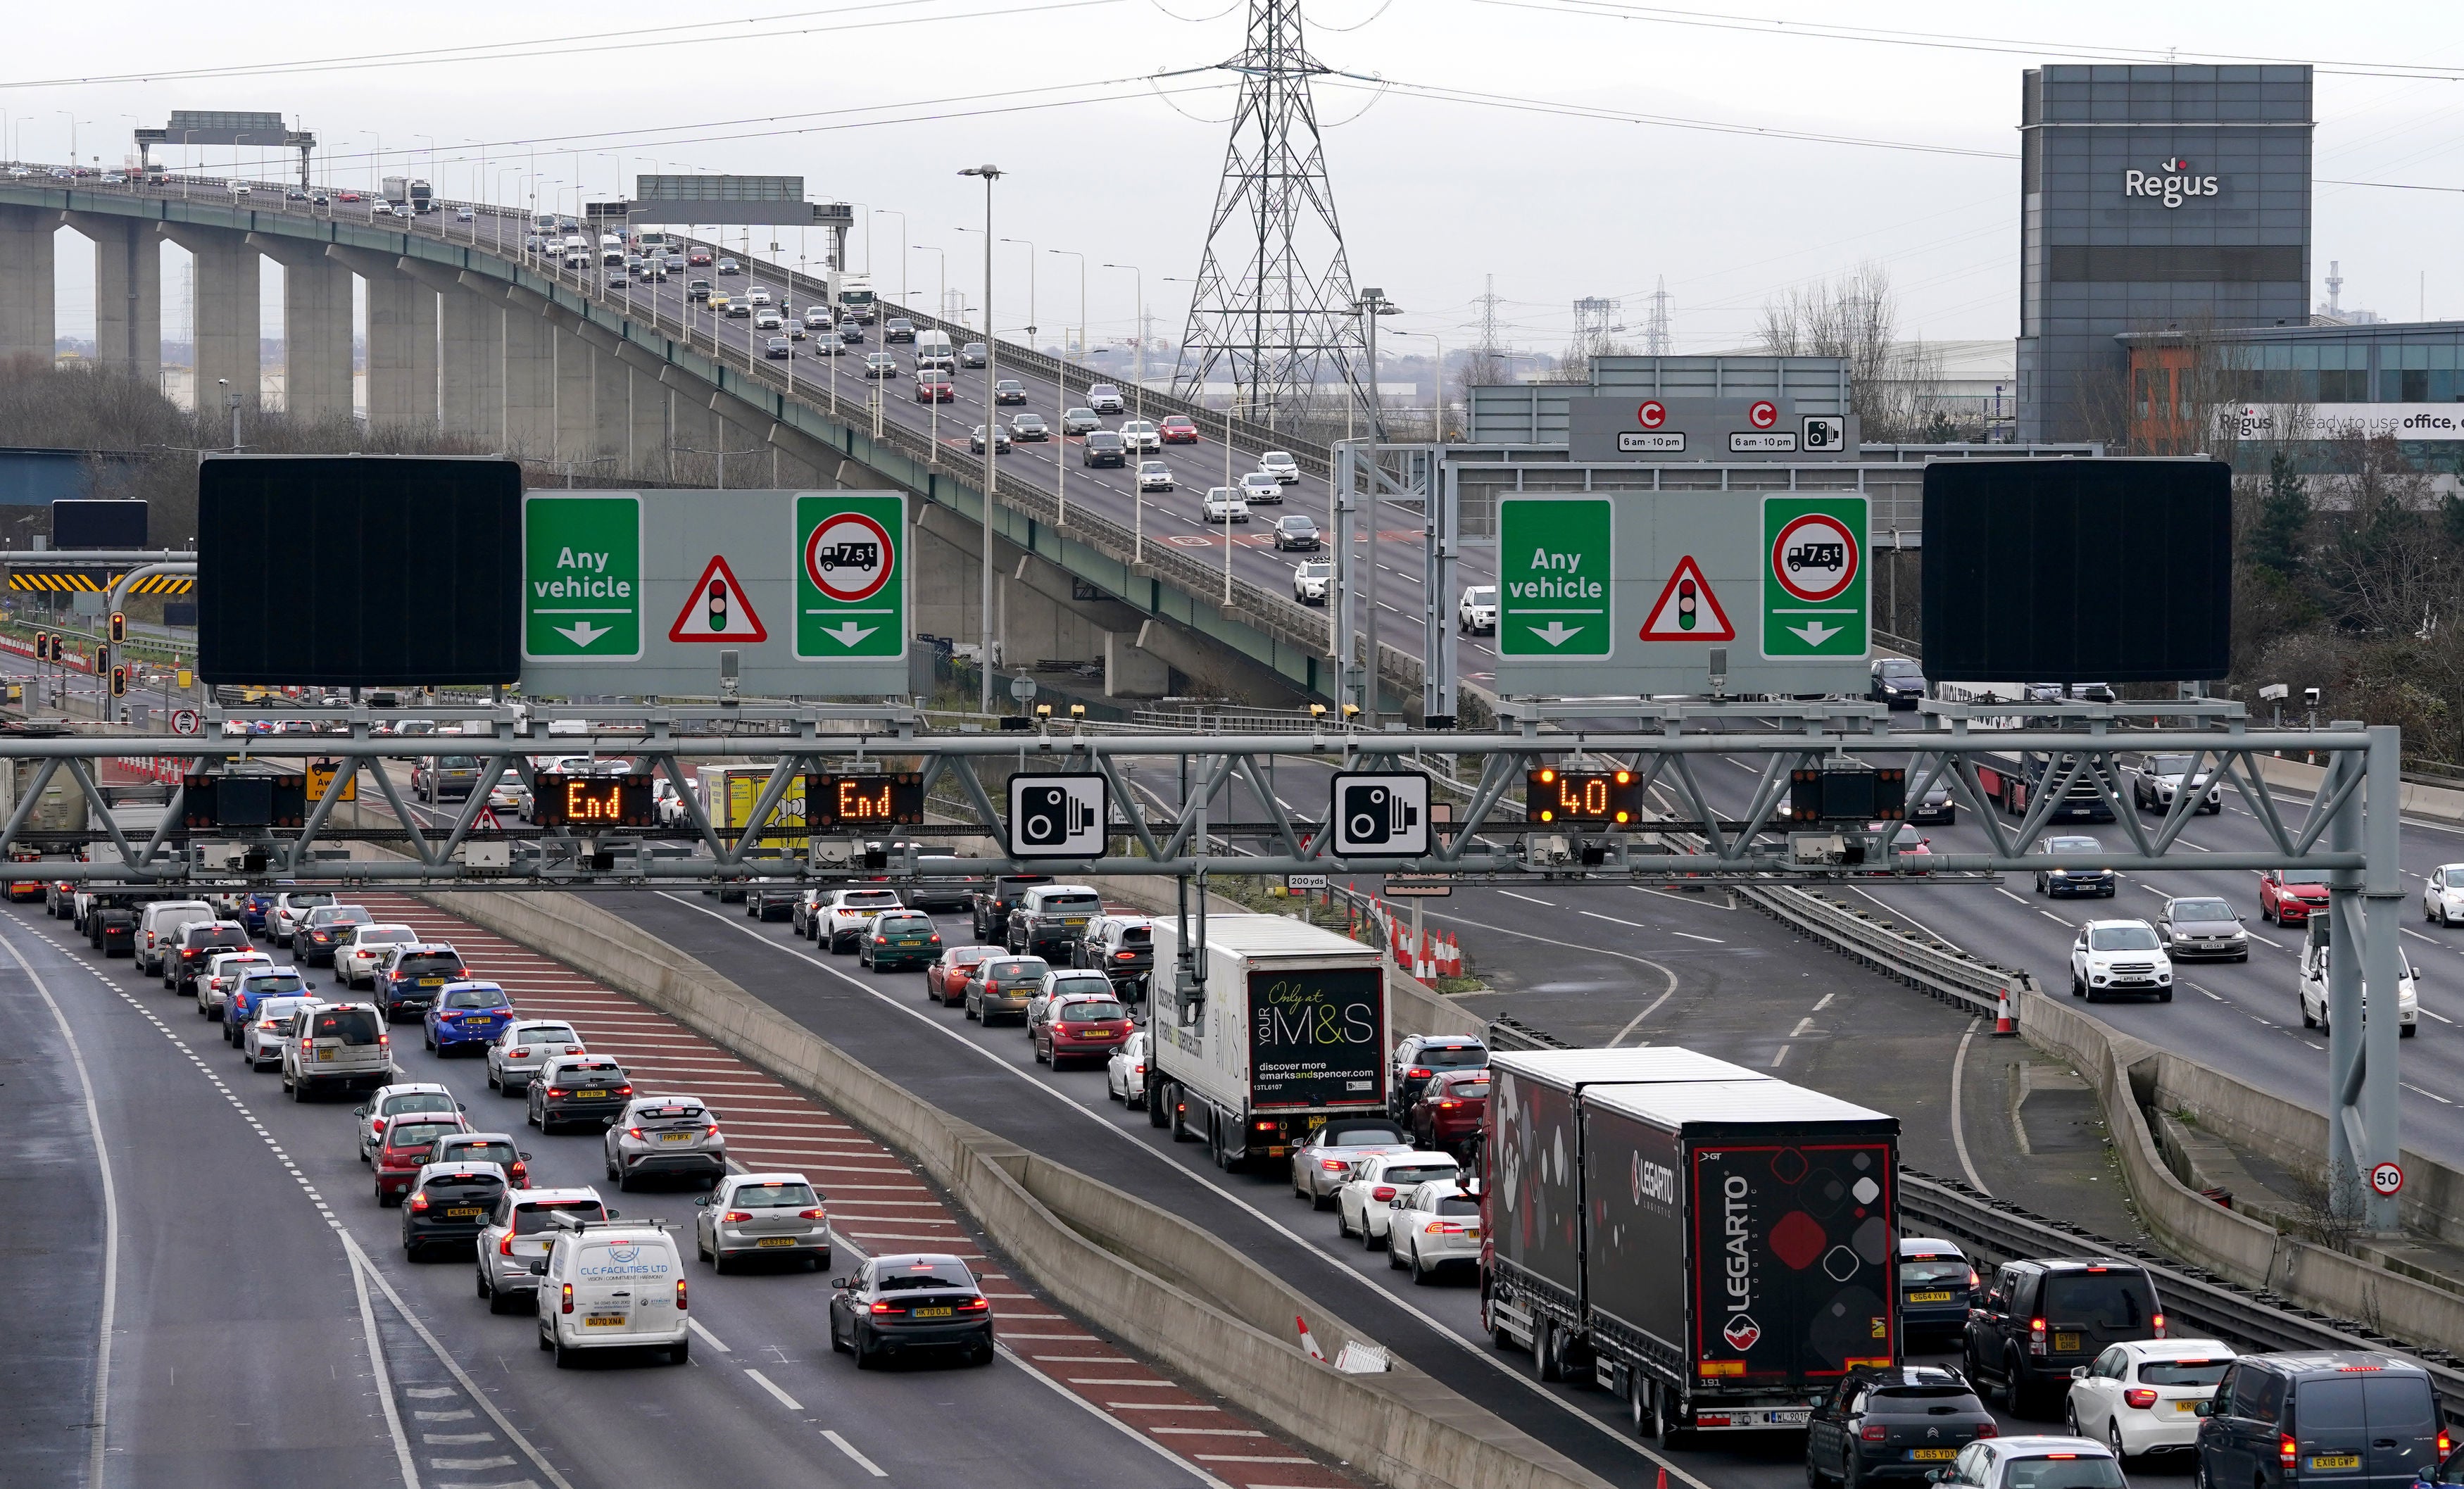 Go slow: motoring organisations warn of extreme congestion on the M25 and elsewhere over Easter